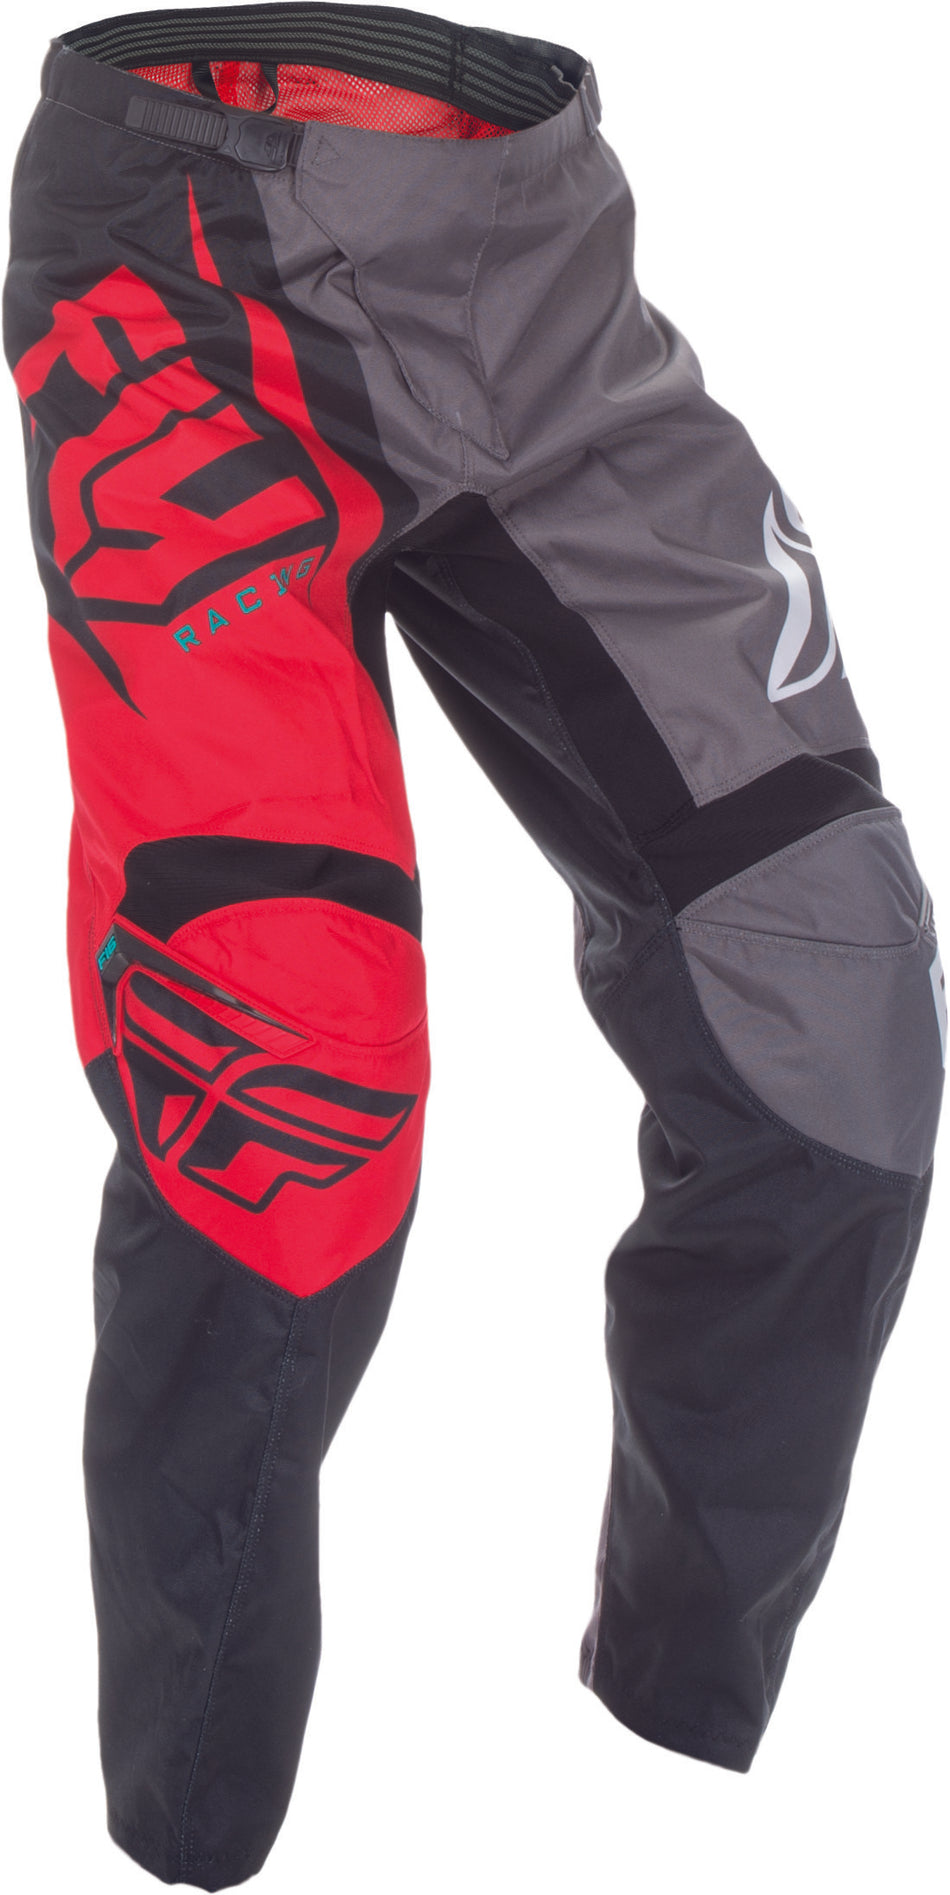 FLY RACING F-16 Pant Red/Black/Grey Sz 40 370-93240